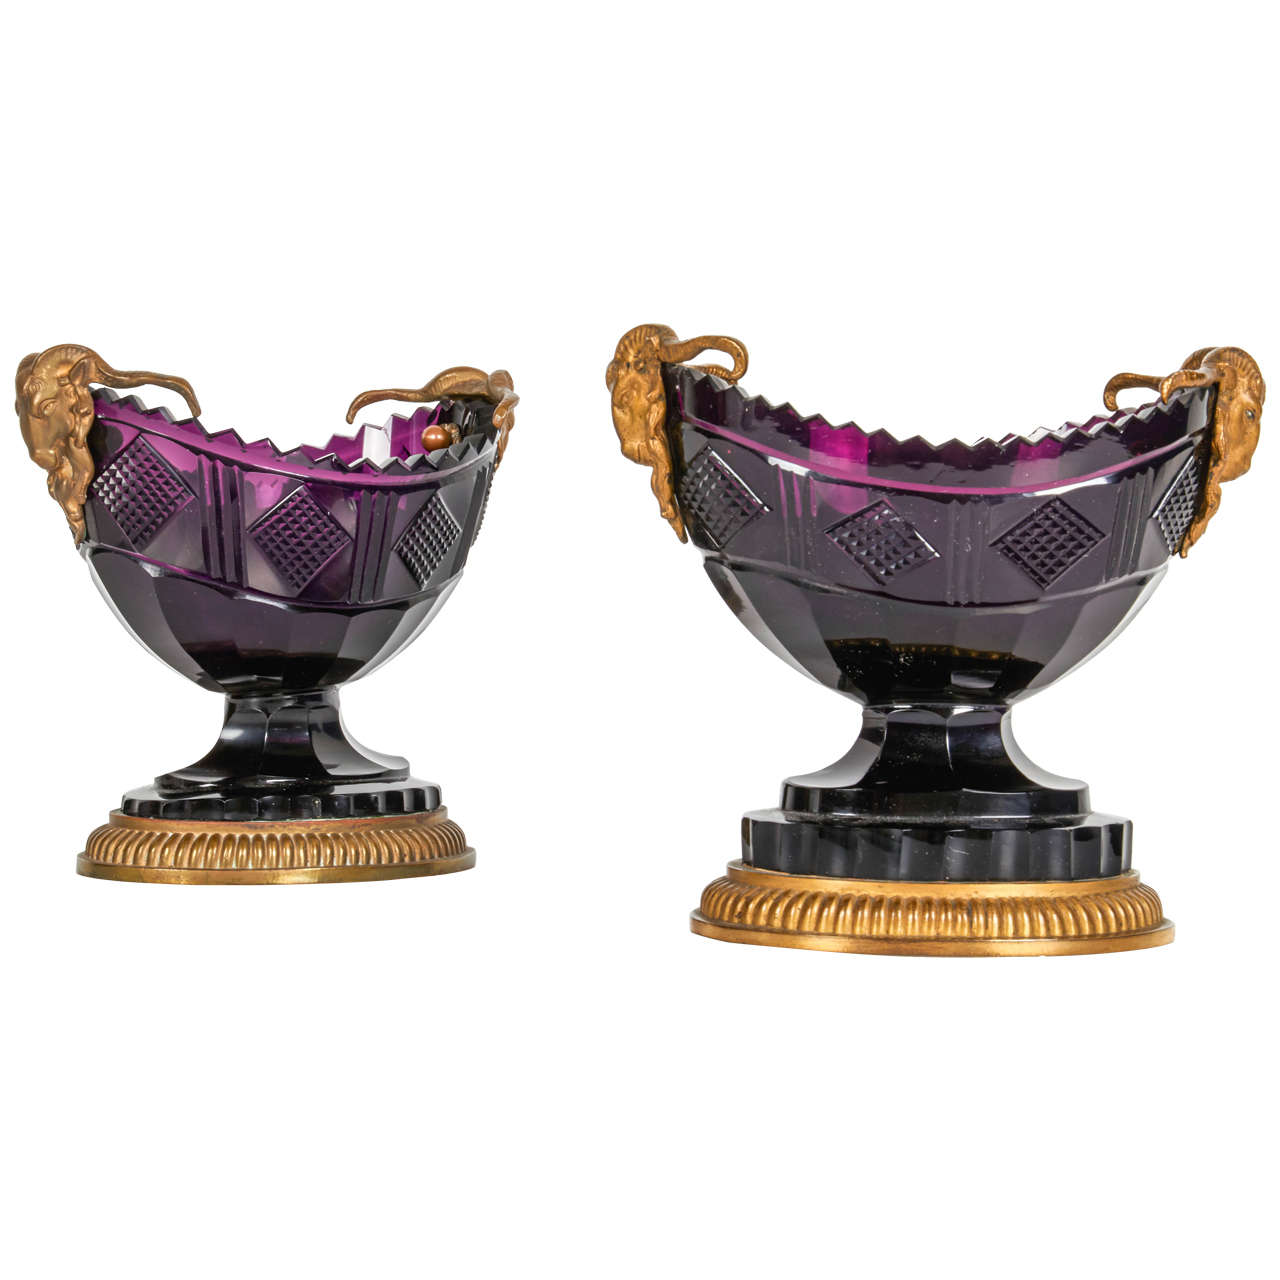 Pair of Antique Russian Ormolu and Amethyst Cut-Glass Compotes